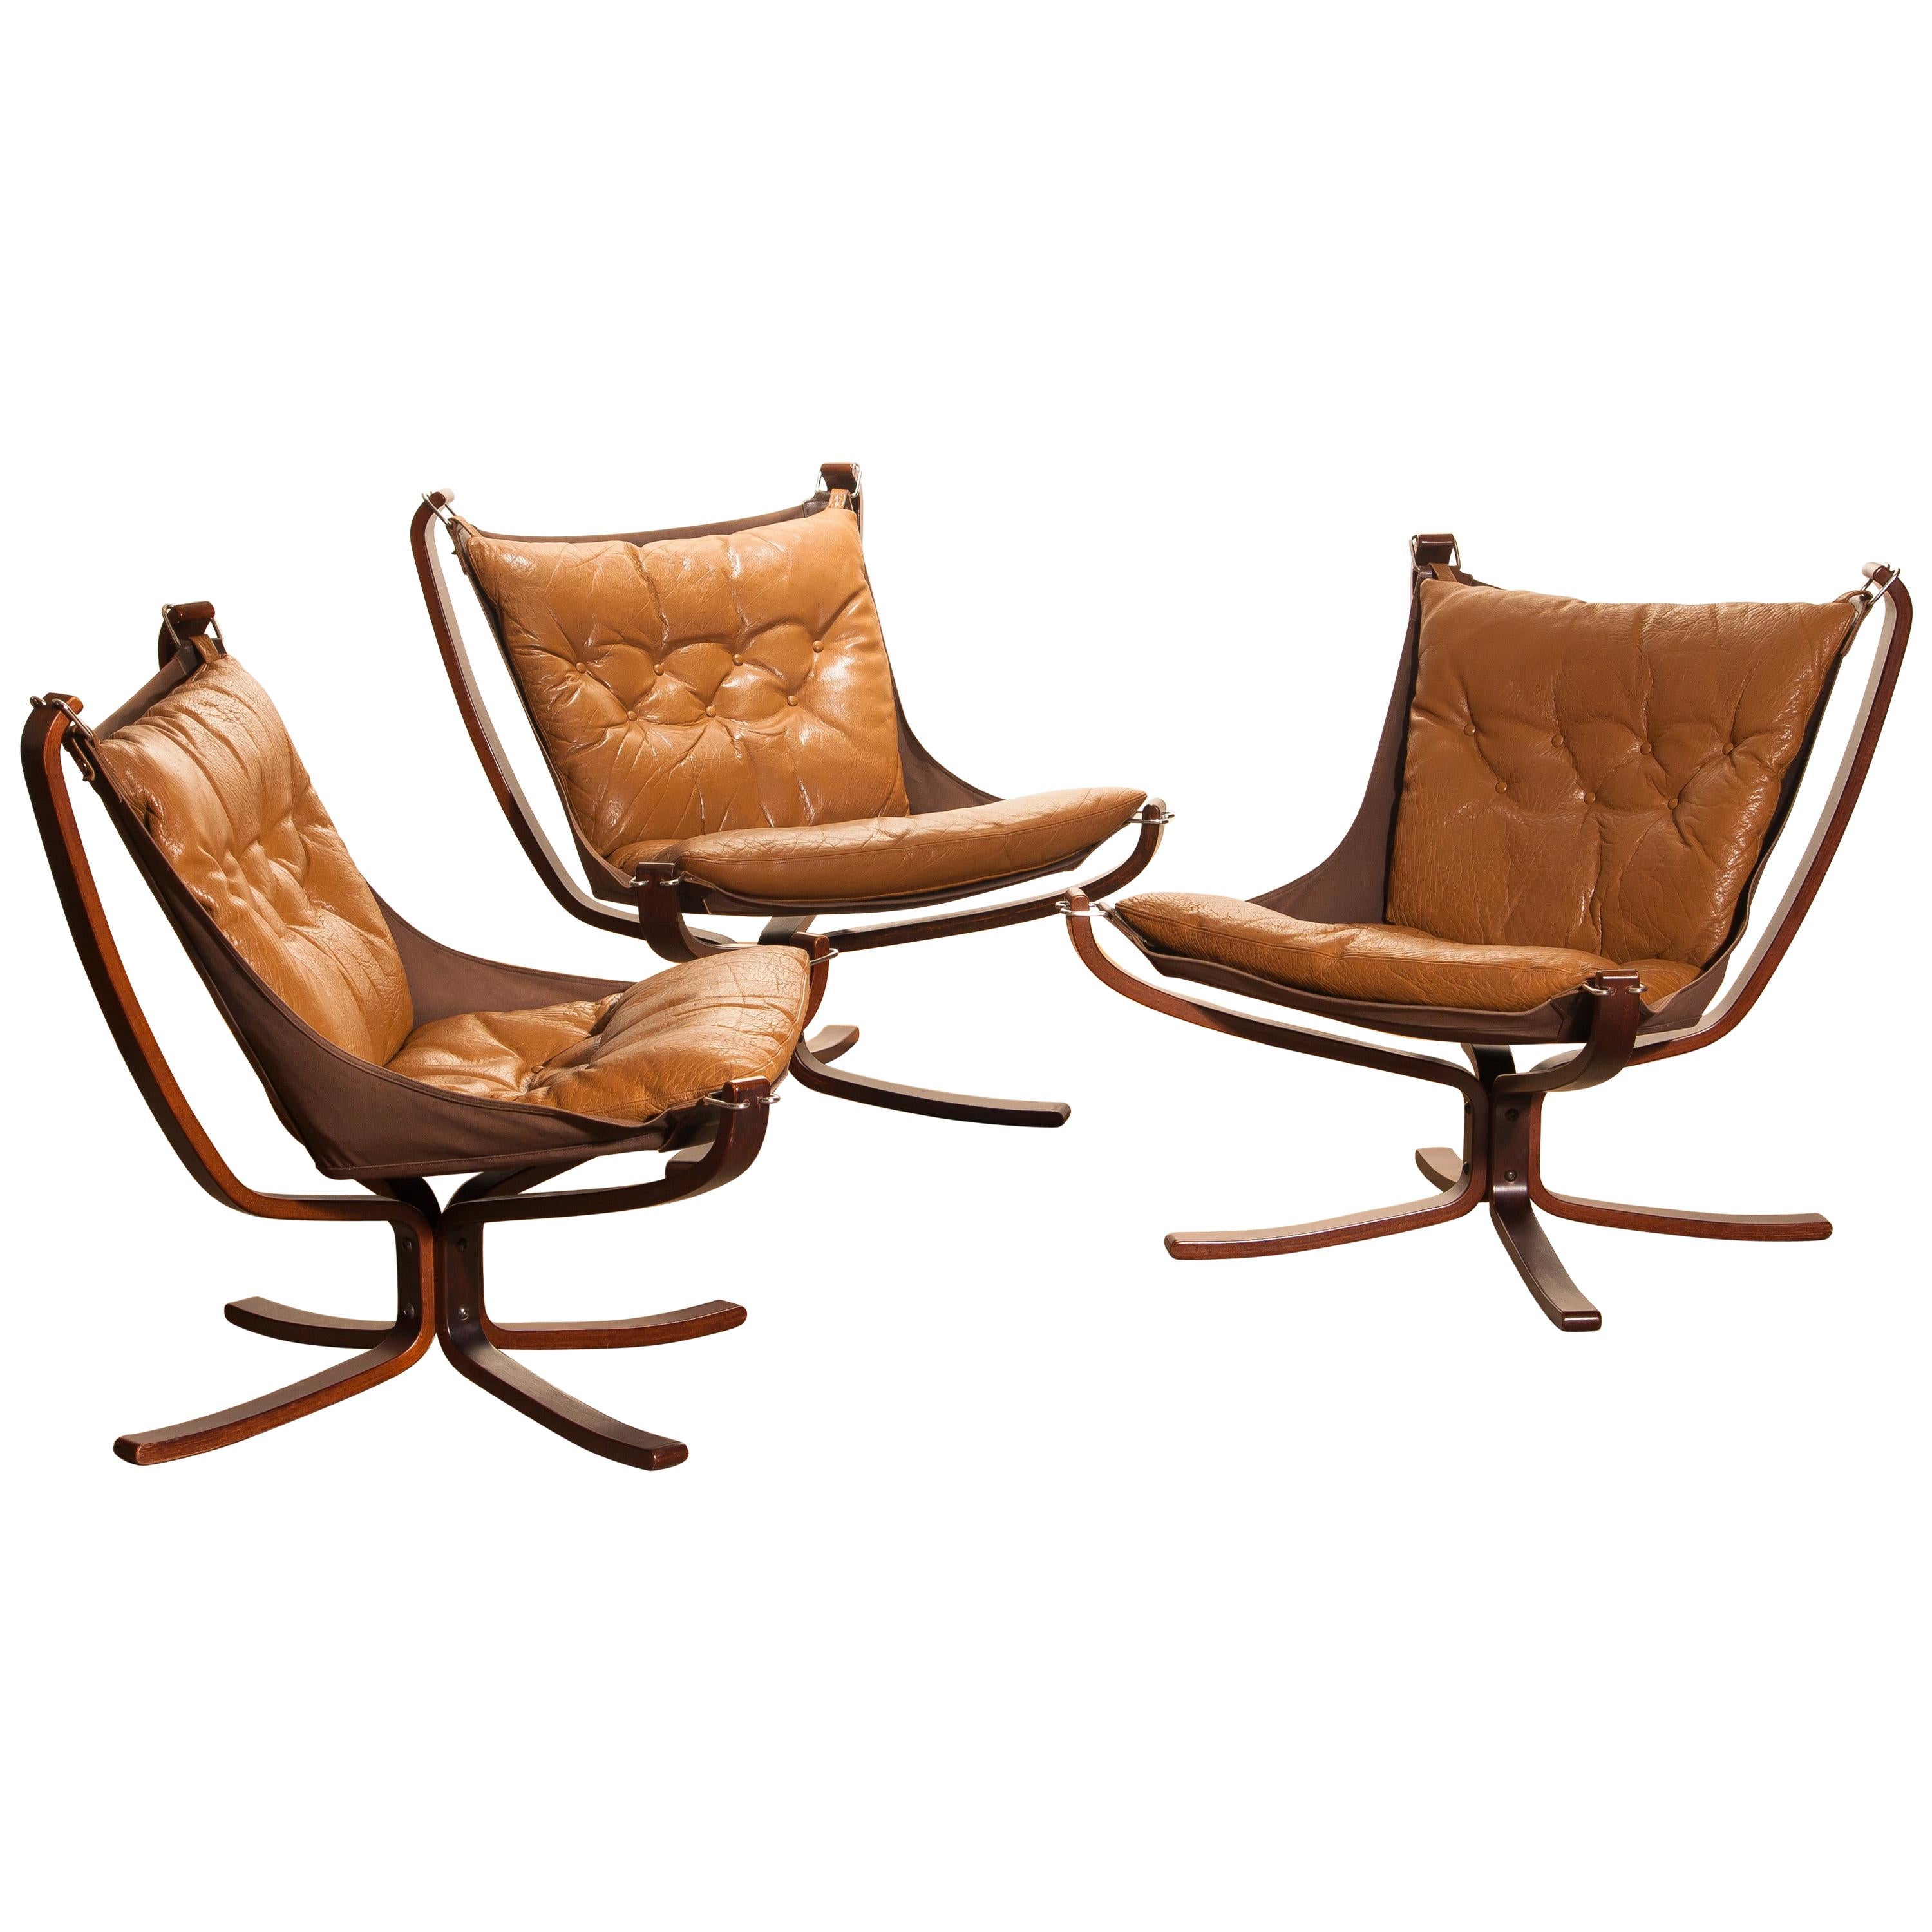 Three Camel Leather 'Falcon' Lounge Chairs or Easy Chairs by Sigurd Ressell